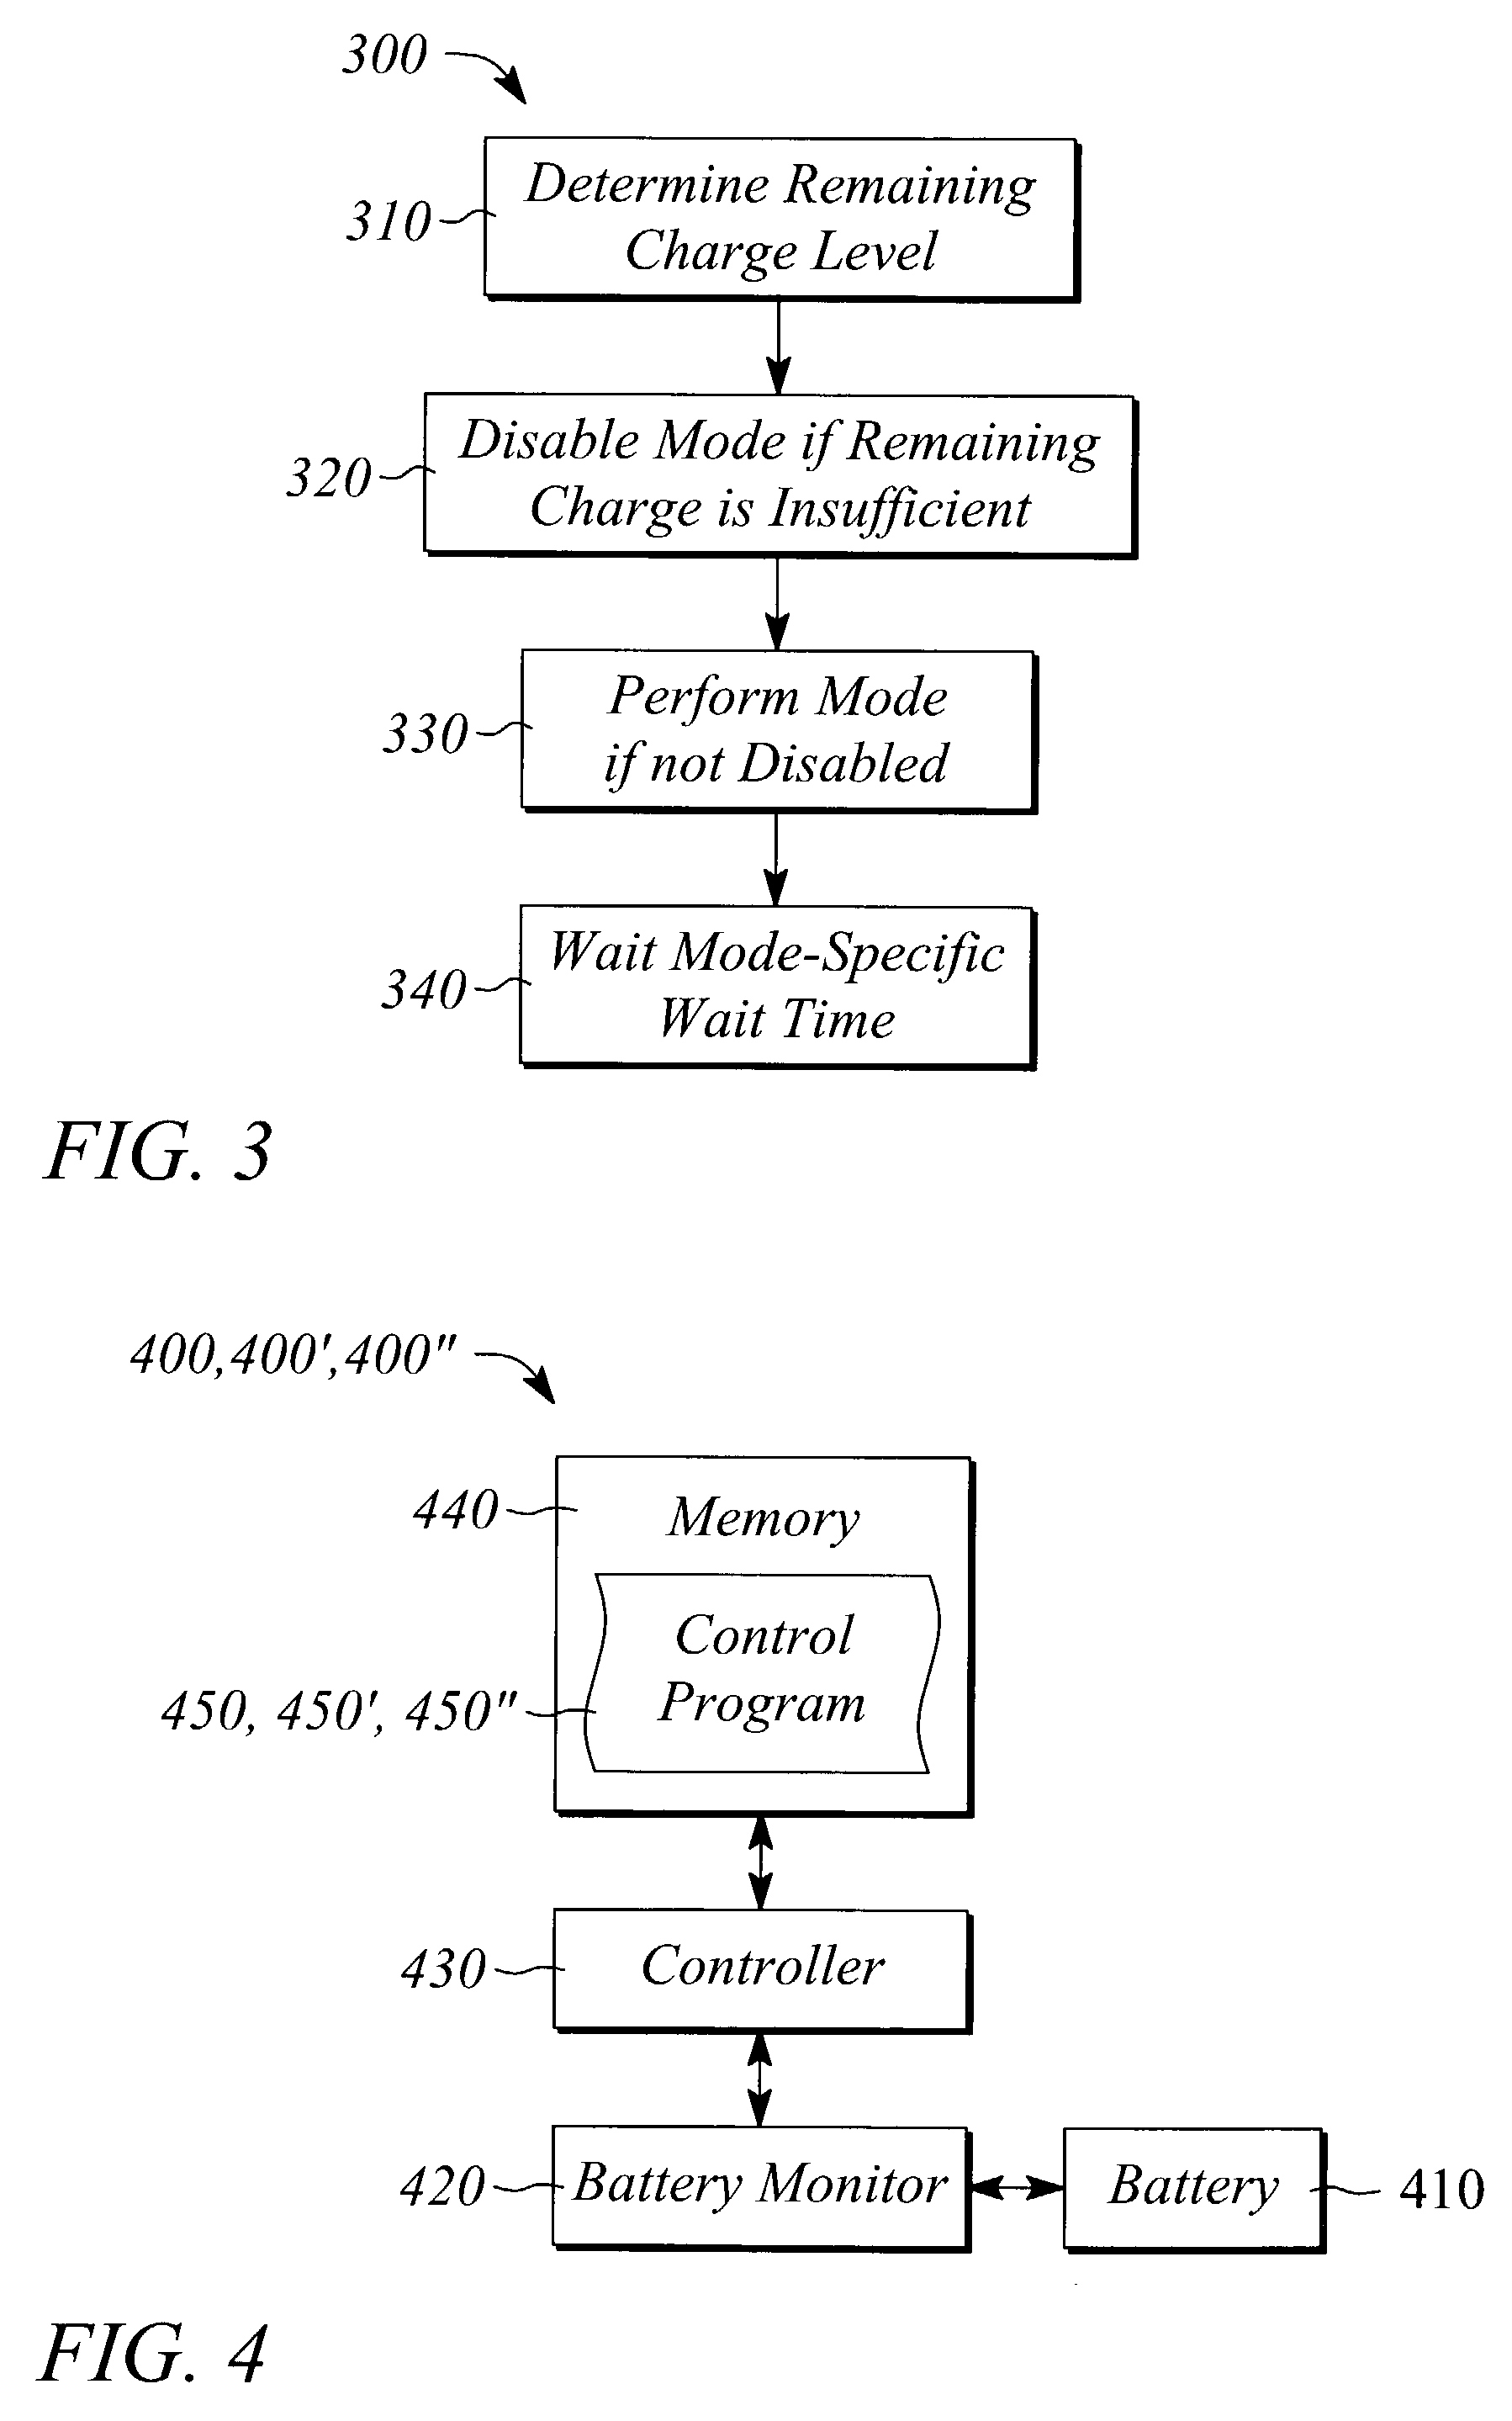 Operational mode-based battery monitoring for a battery-powered electronic device